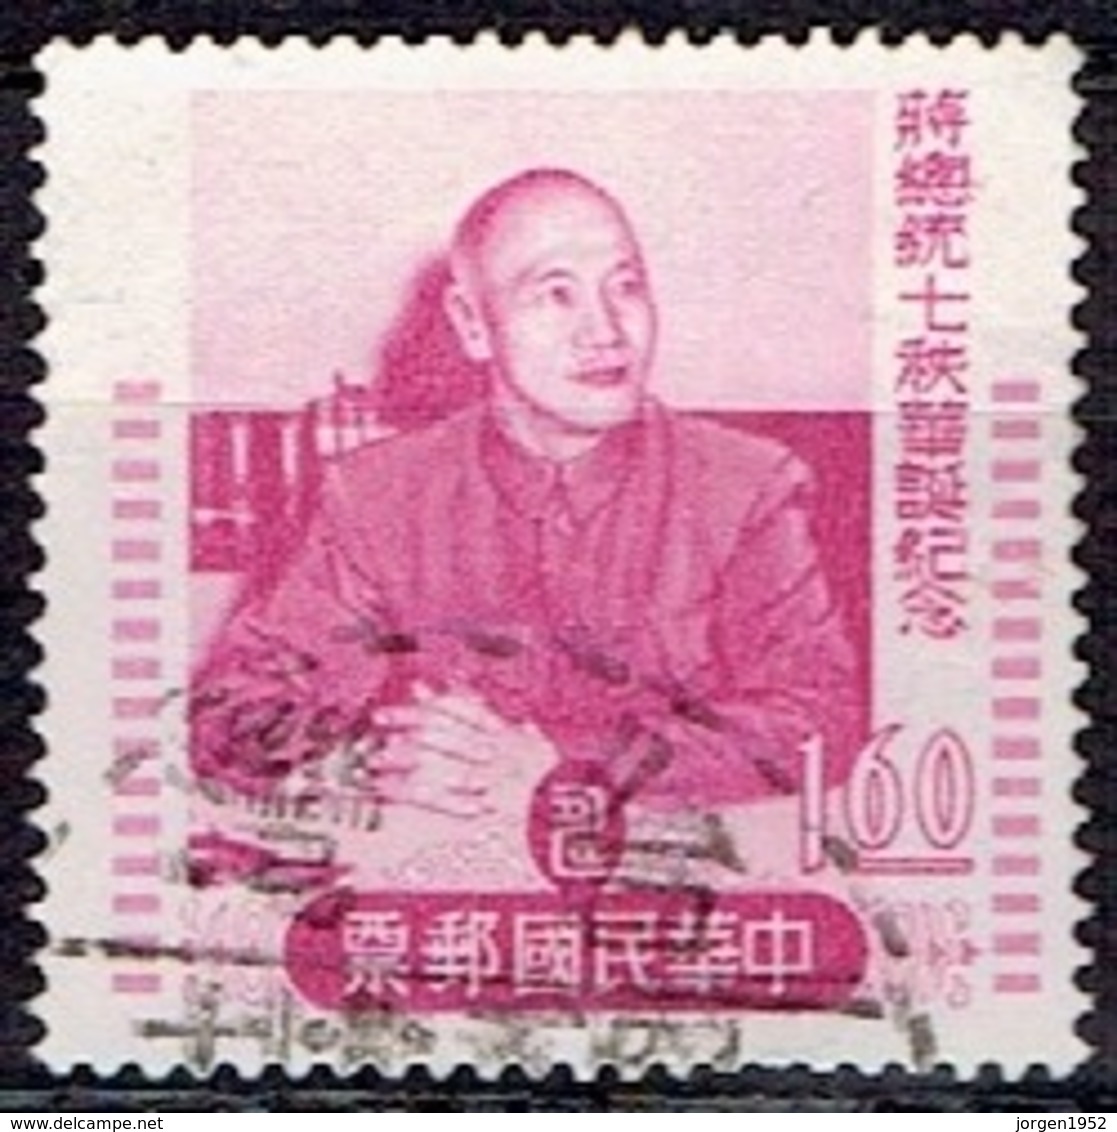 TAIWAN #   FROM 1956 STAMPWORLD 248 - Oblitérés